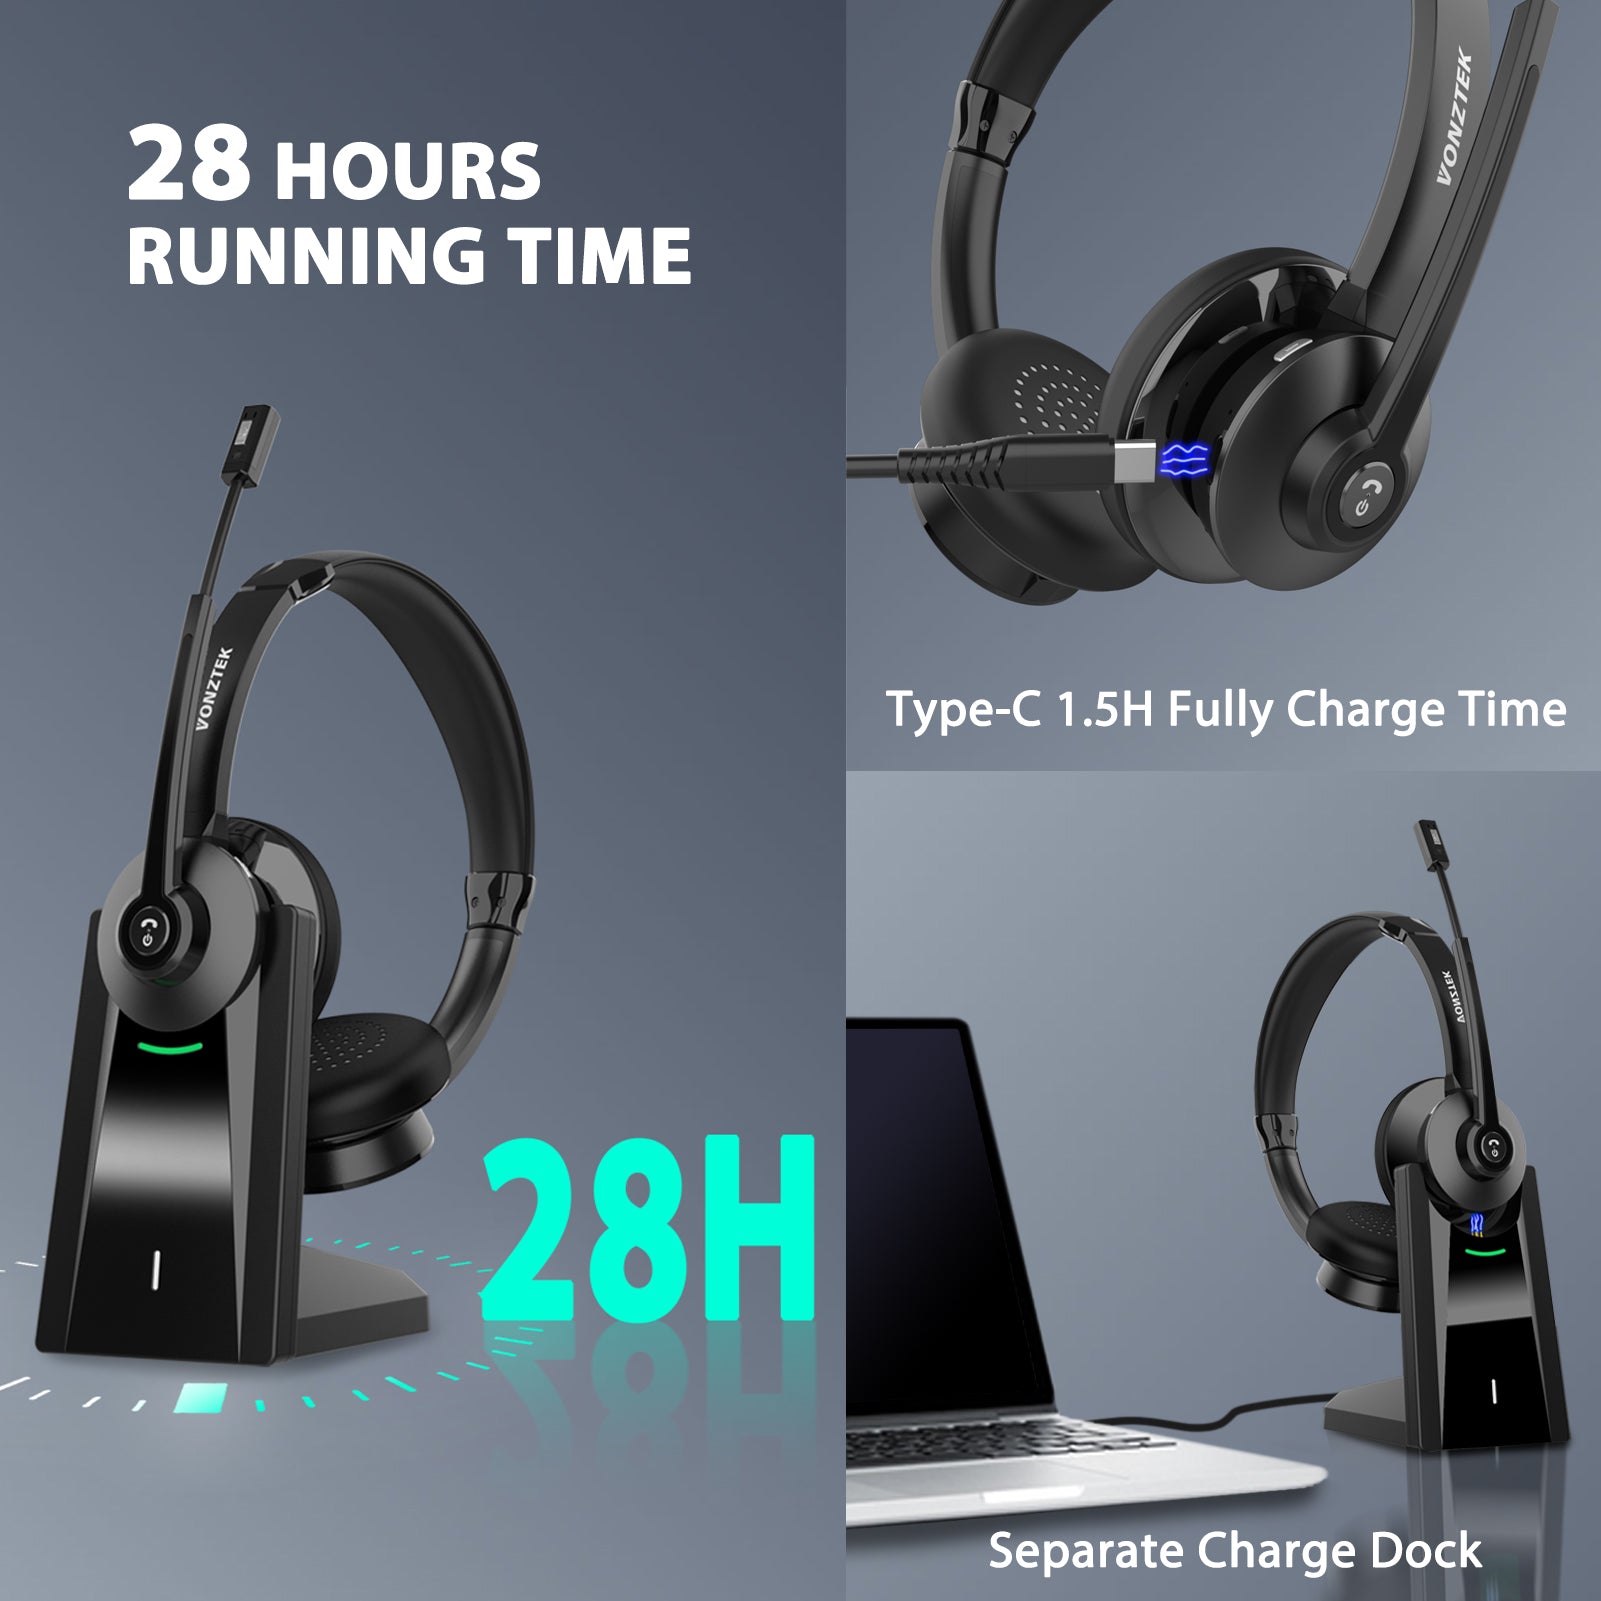 28 Hours running time,Type-C 1.5H fully charge time,separate charge dock